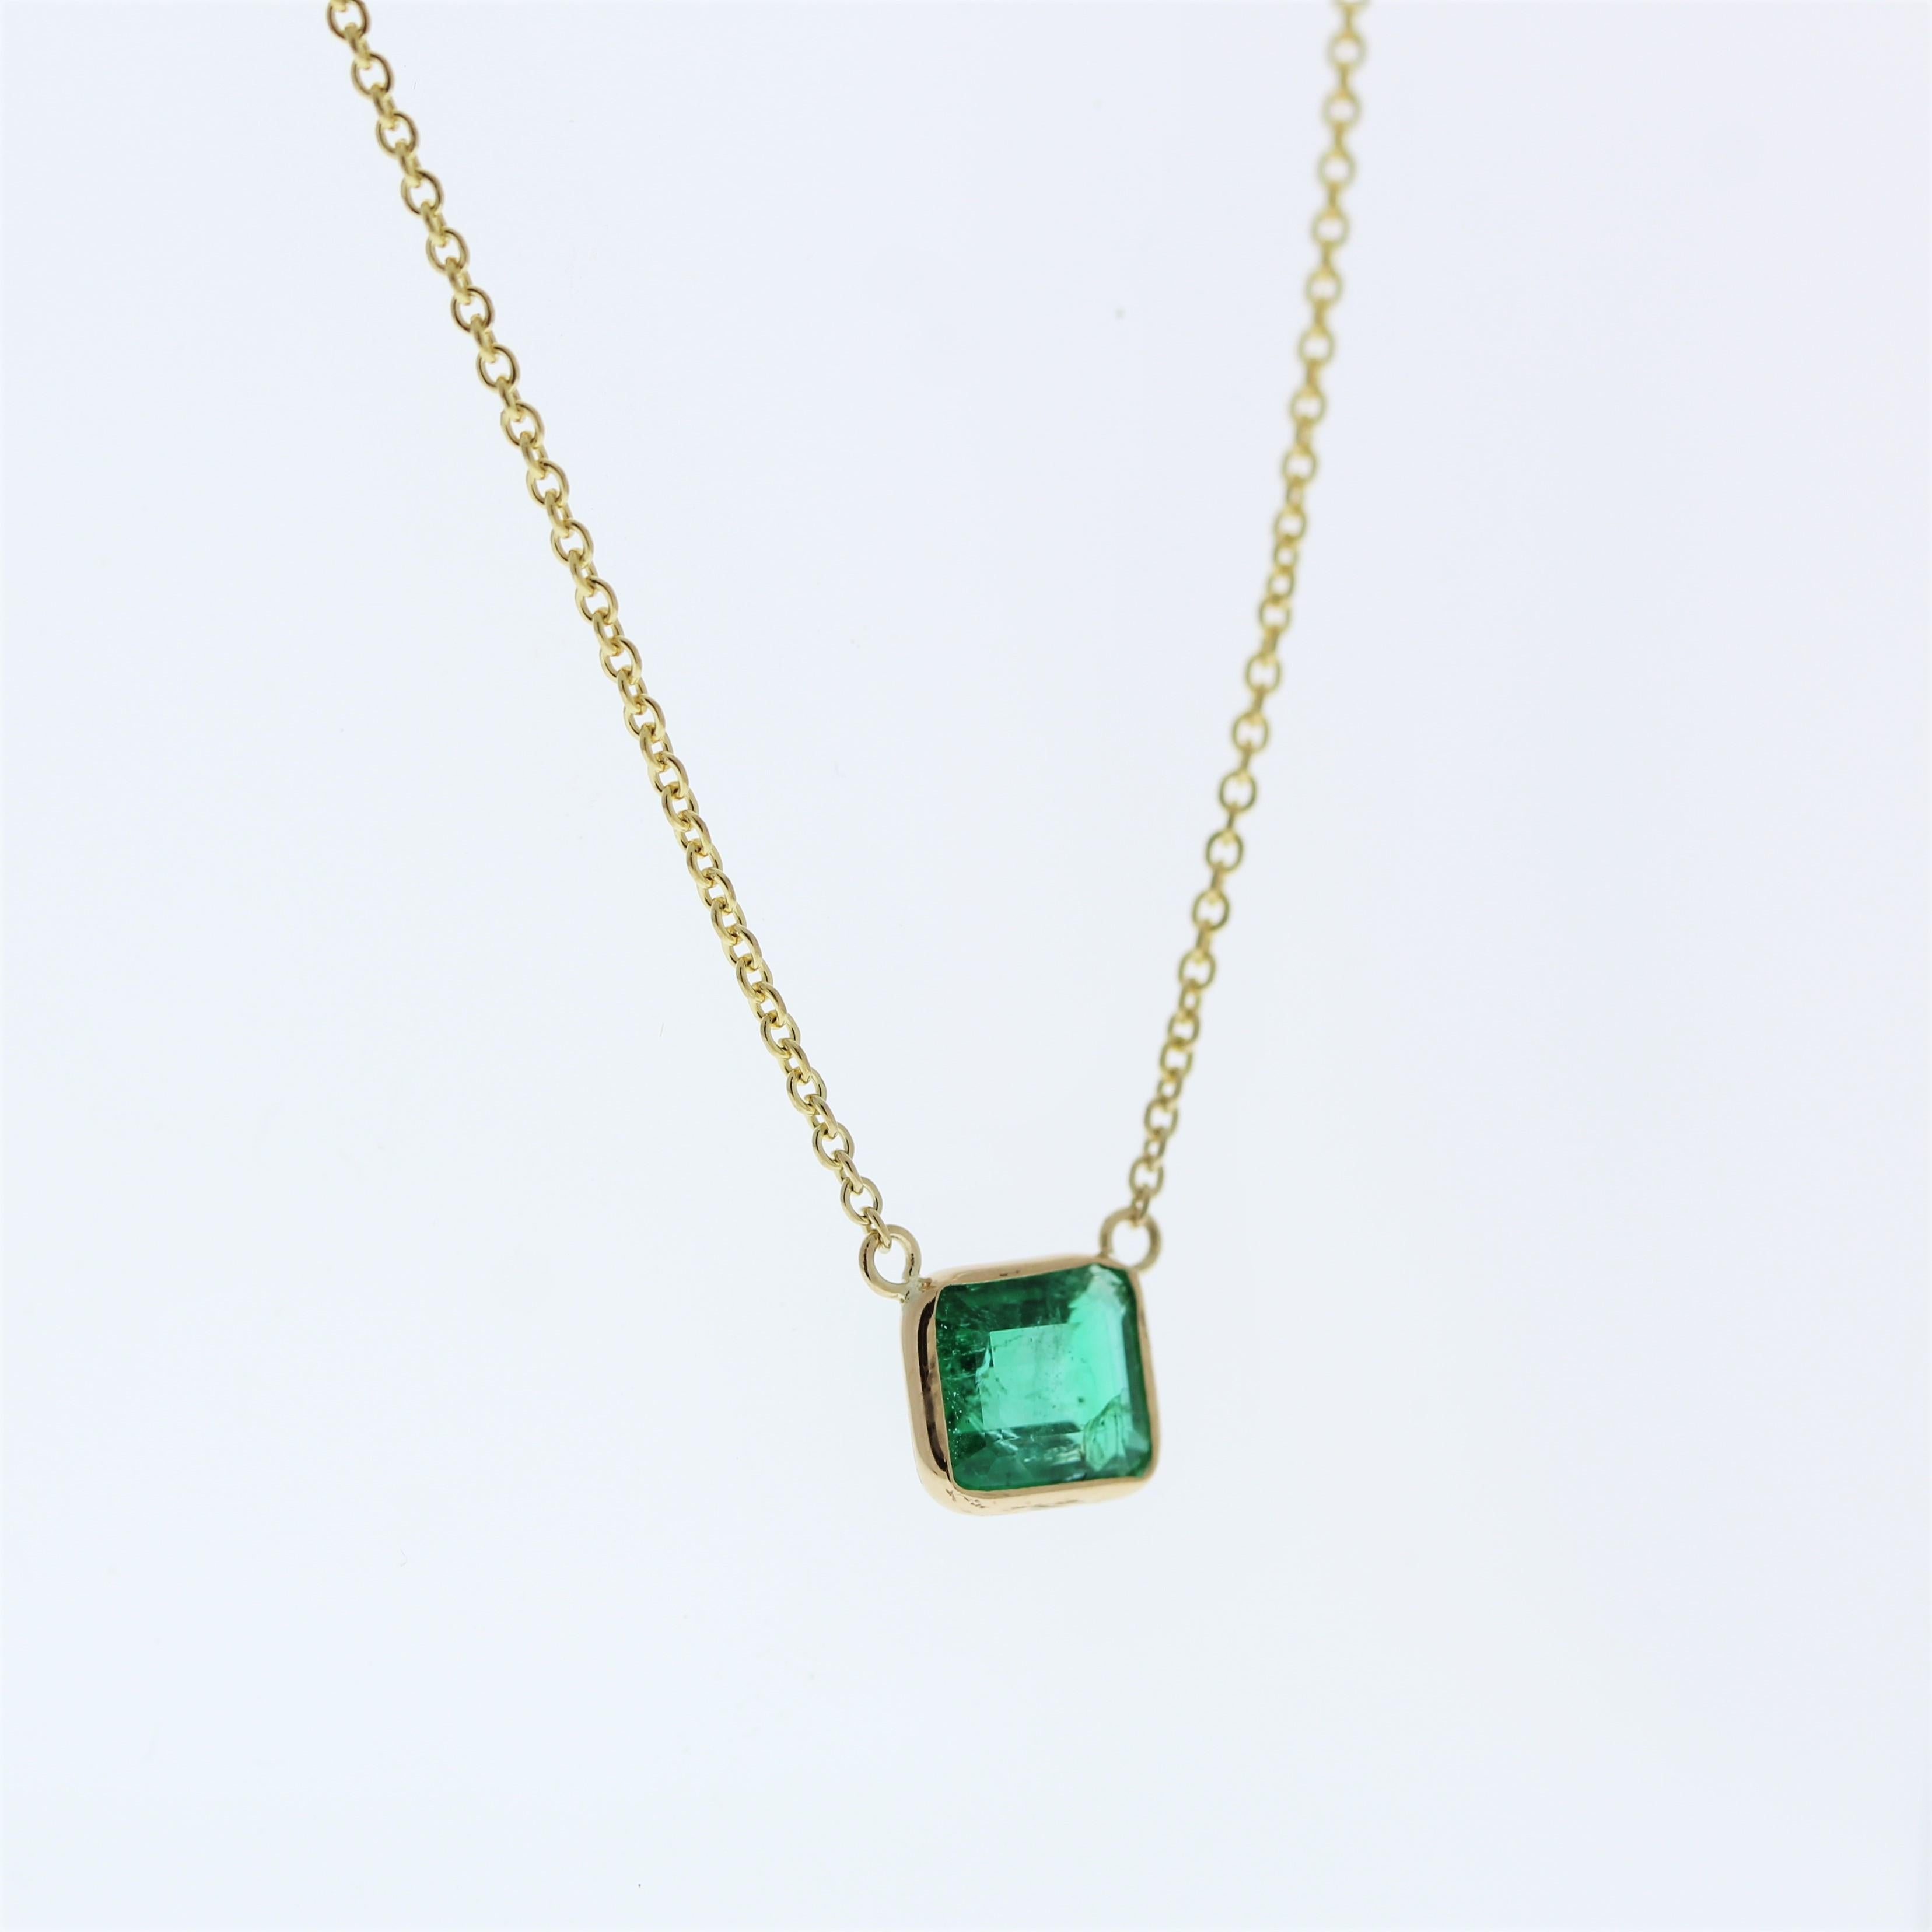 The necklace features a 1.15-carat emerald-cut bluish green emerald set in a 14 karat yellow gold pendant or setting. The combination of the emerald's unique cut and its bluish green color against the yellow gold setting is likely to create a